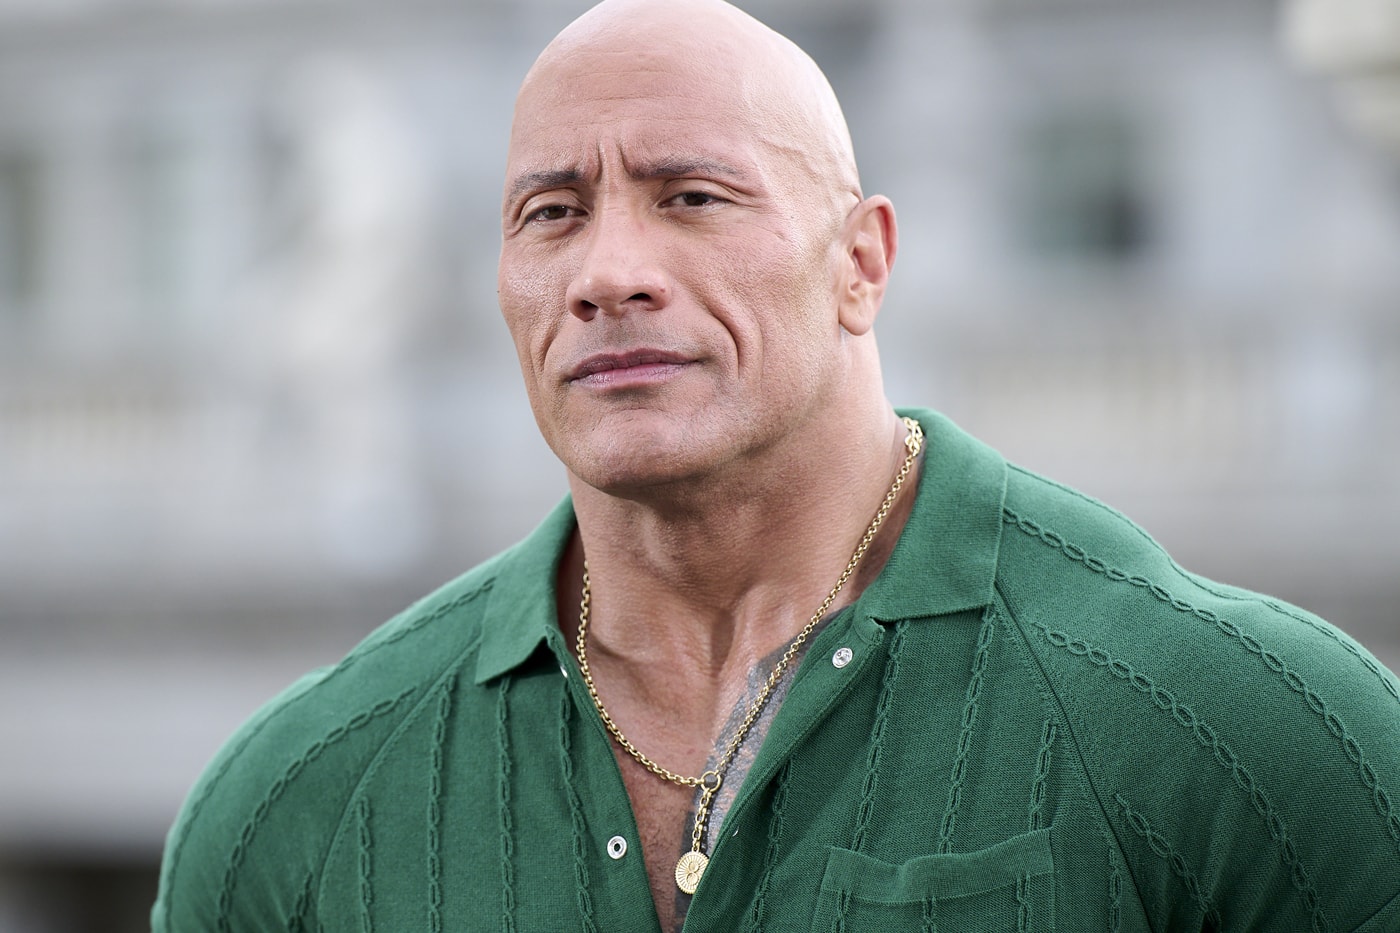 Dwayne Johnson to Return as Hobbs in New 'Fast and Furious' Movie